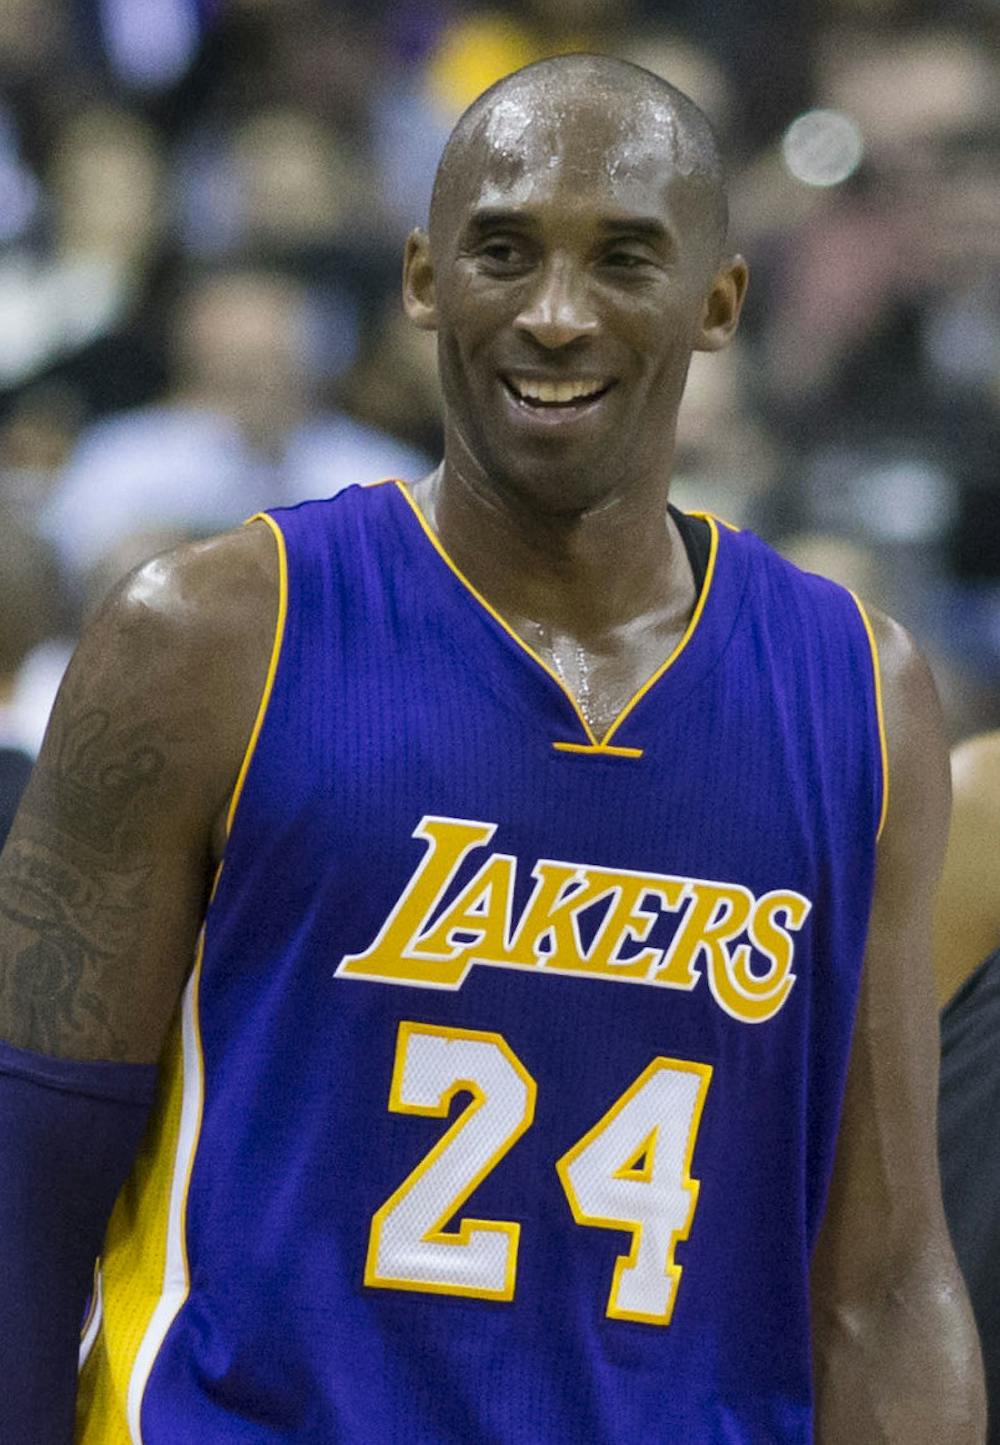 CC BY 2.0/Keith Allison
Kobe Bryant's impact and legacy make him a fitting candidate to be featured as the NBA's logo.